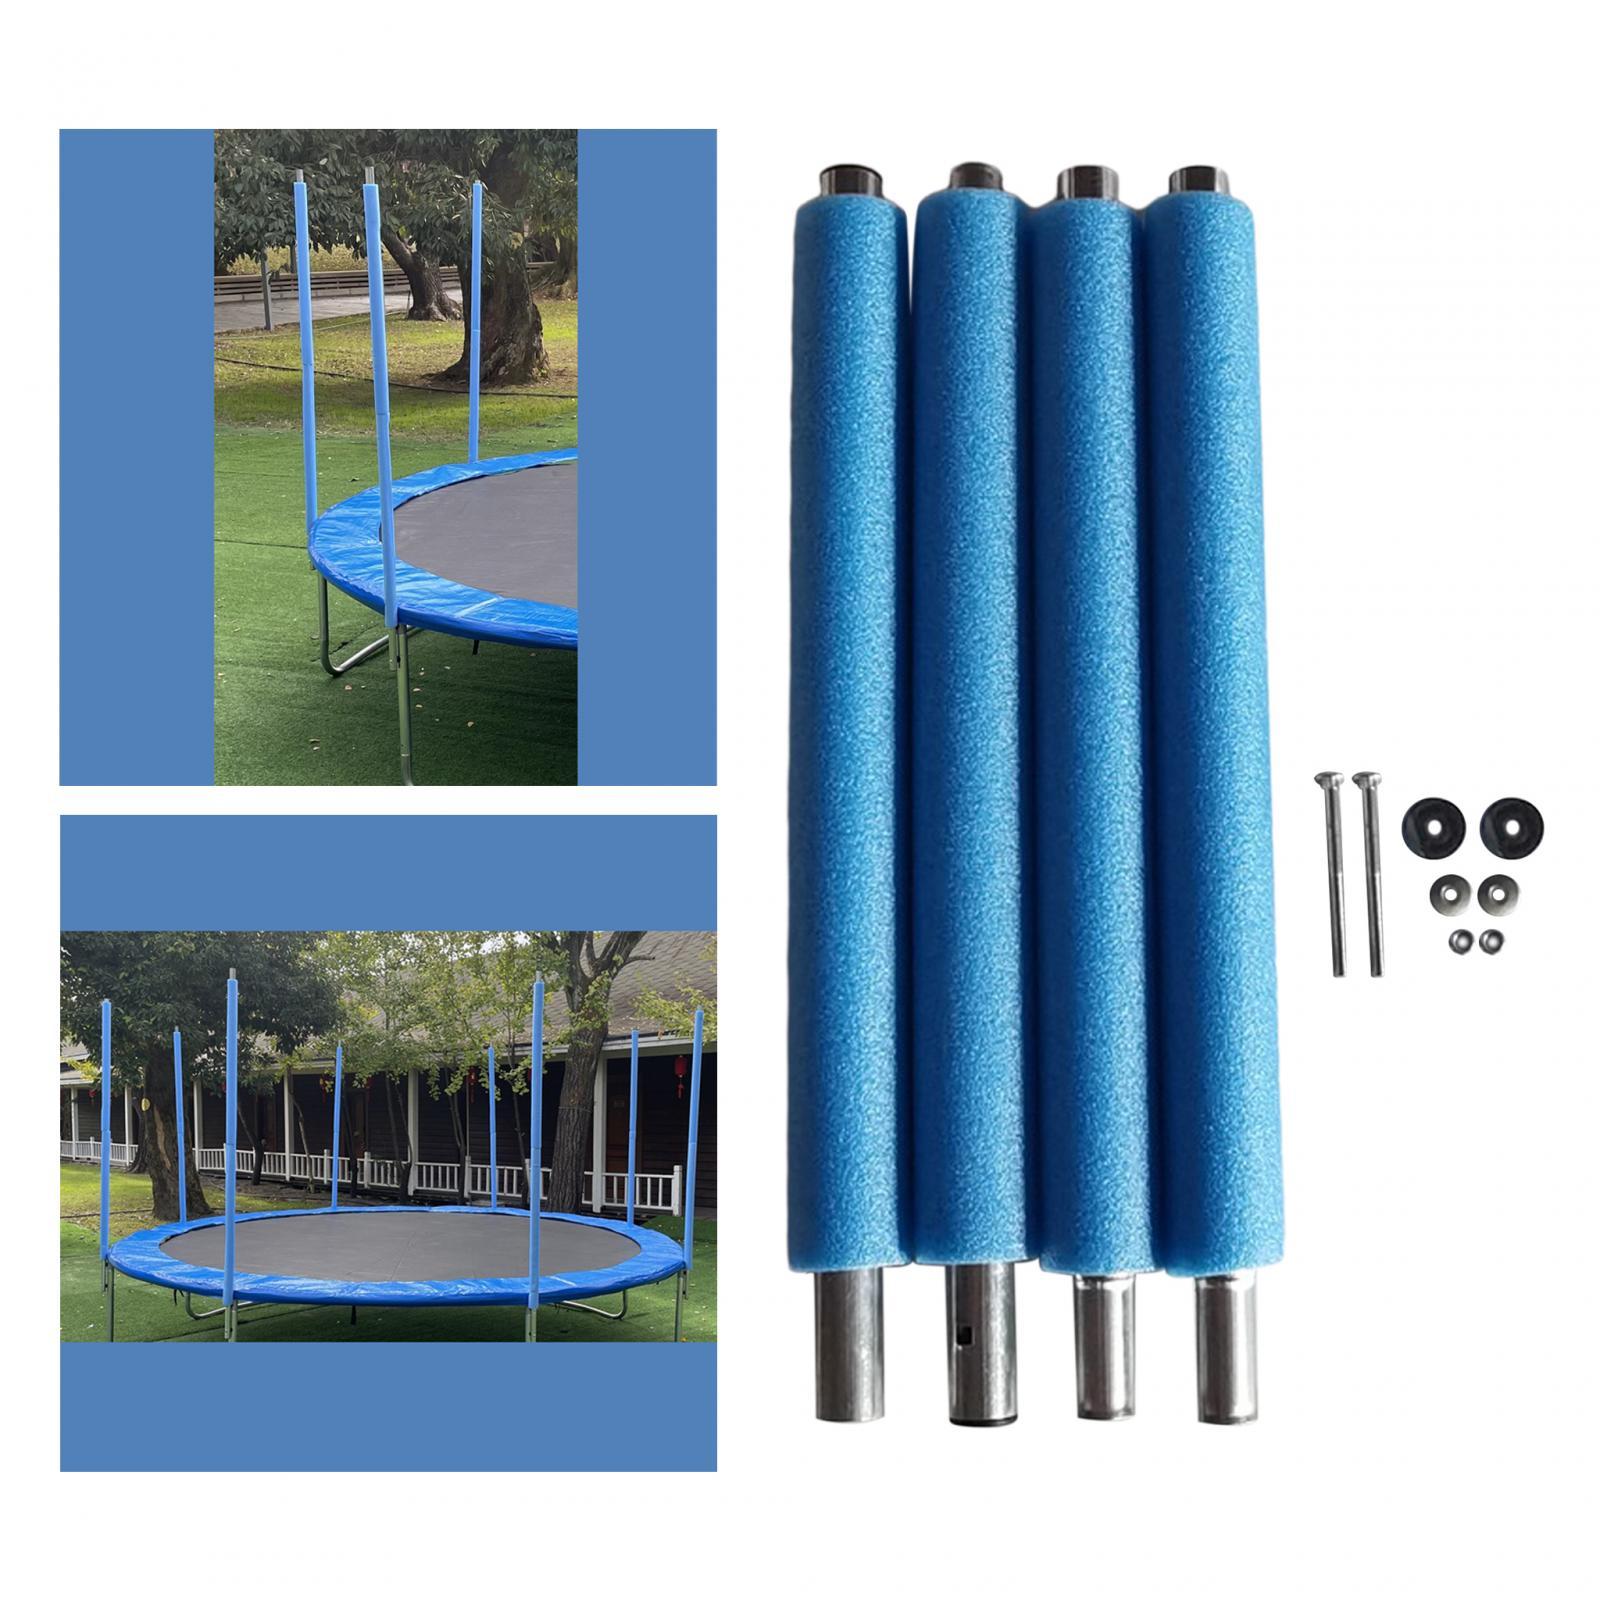 4Pcs Trampoline Poles Replace Steel Pipe for Jump Bed Bounce Bed Outdoor